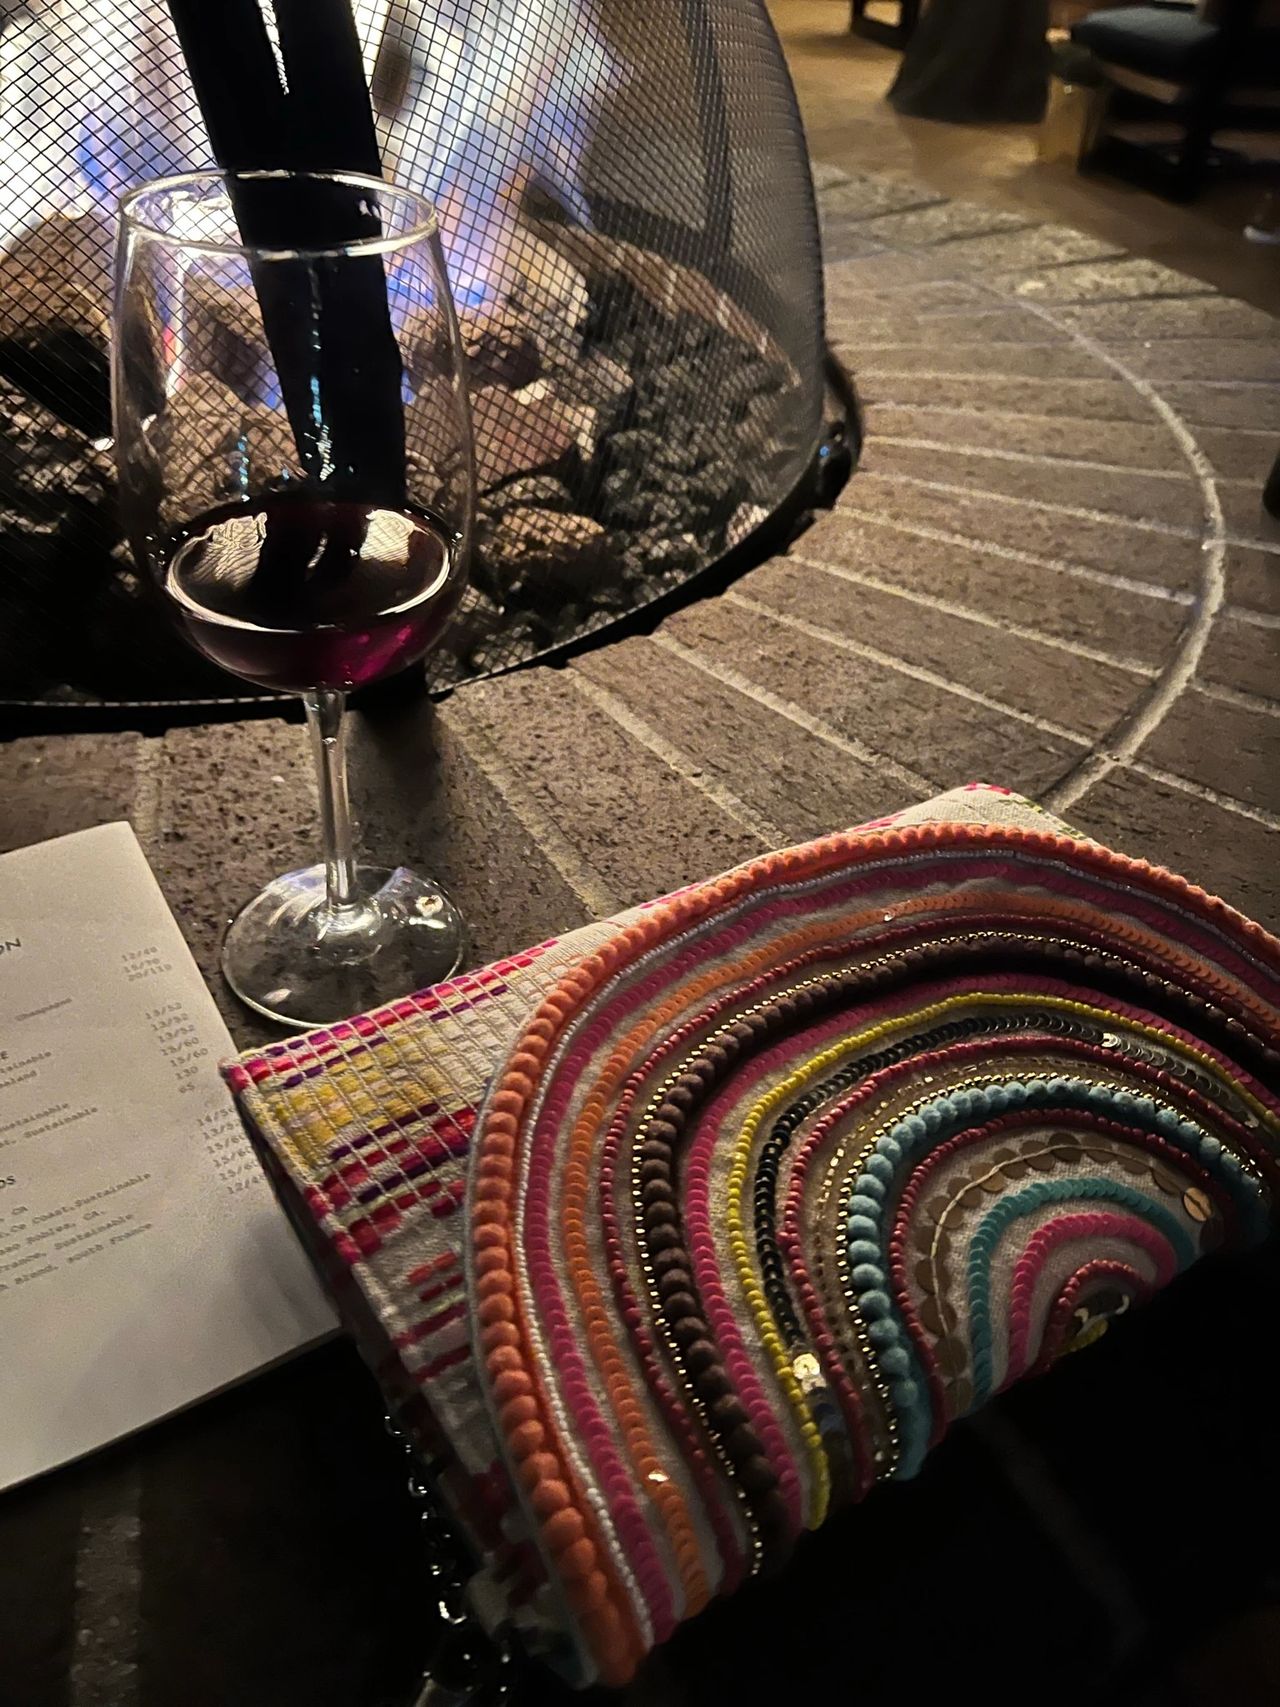 A glass of red wine by the fire